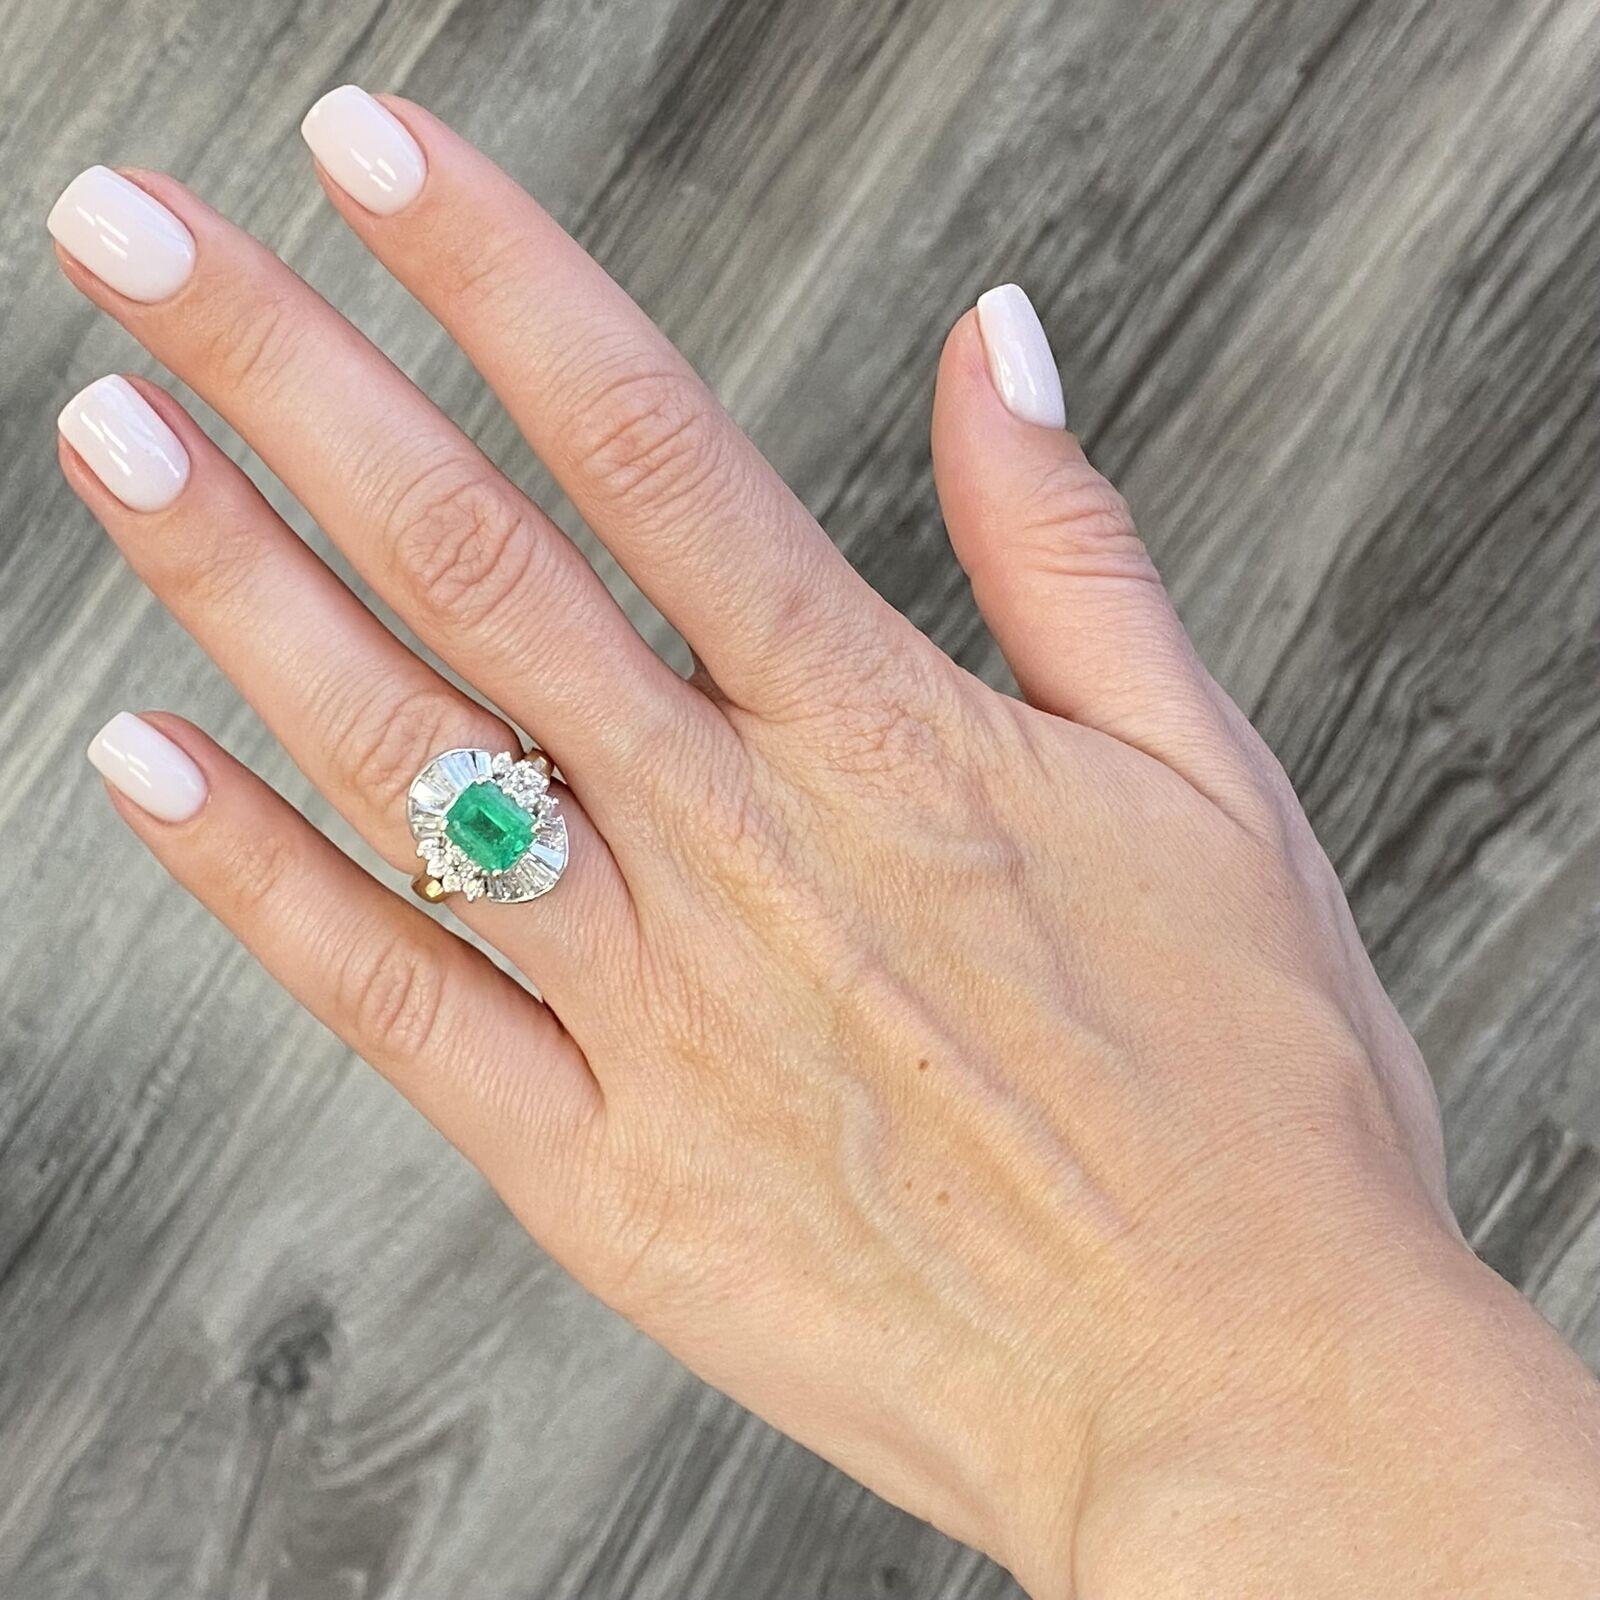 Specifications:

*Motivated to Sell – Please make a Fair Offer*

Pre-Owned (good condition; diamonds have some chips(need a loupe to see it))

Main Stone: 2.32ct Green Emerald

2.32ct Green Emerald with Diamonds In 14k Yellow